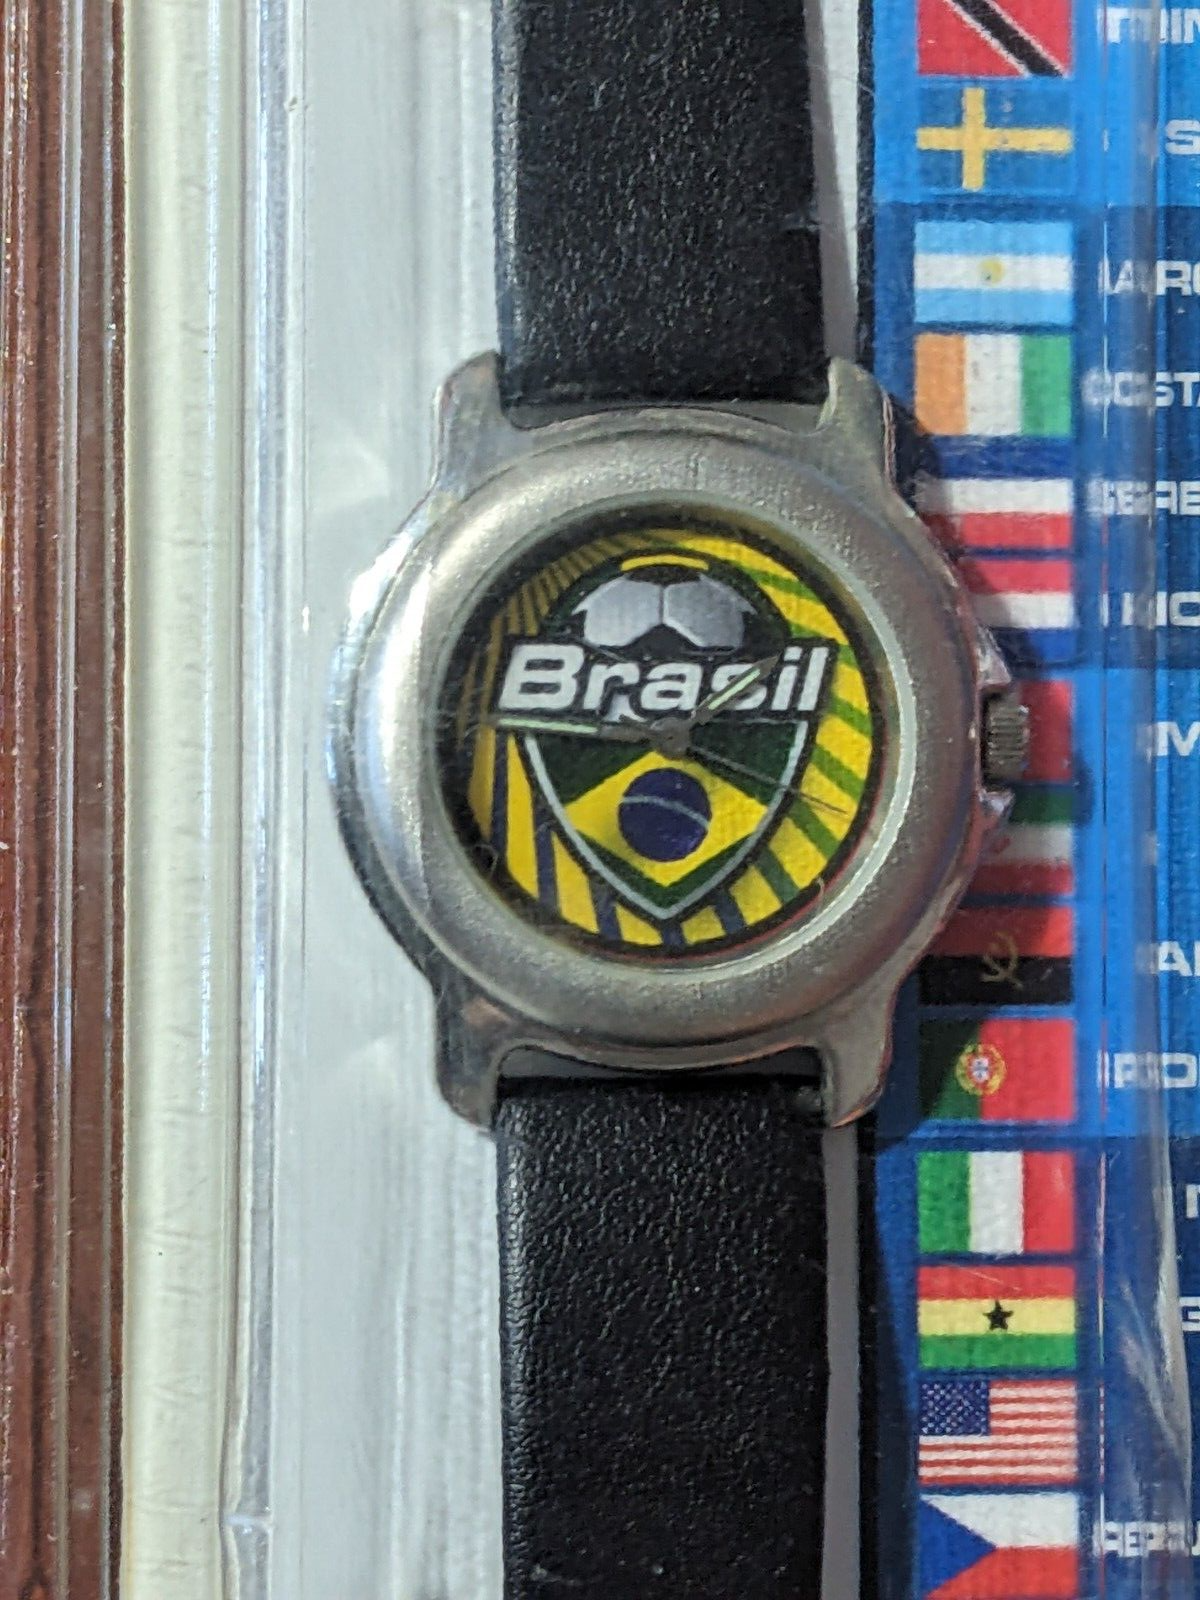 FIFA WORLD CUP Brasil 2006 Wrist Watch Official Licensed Black/Yellow Brazil